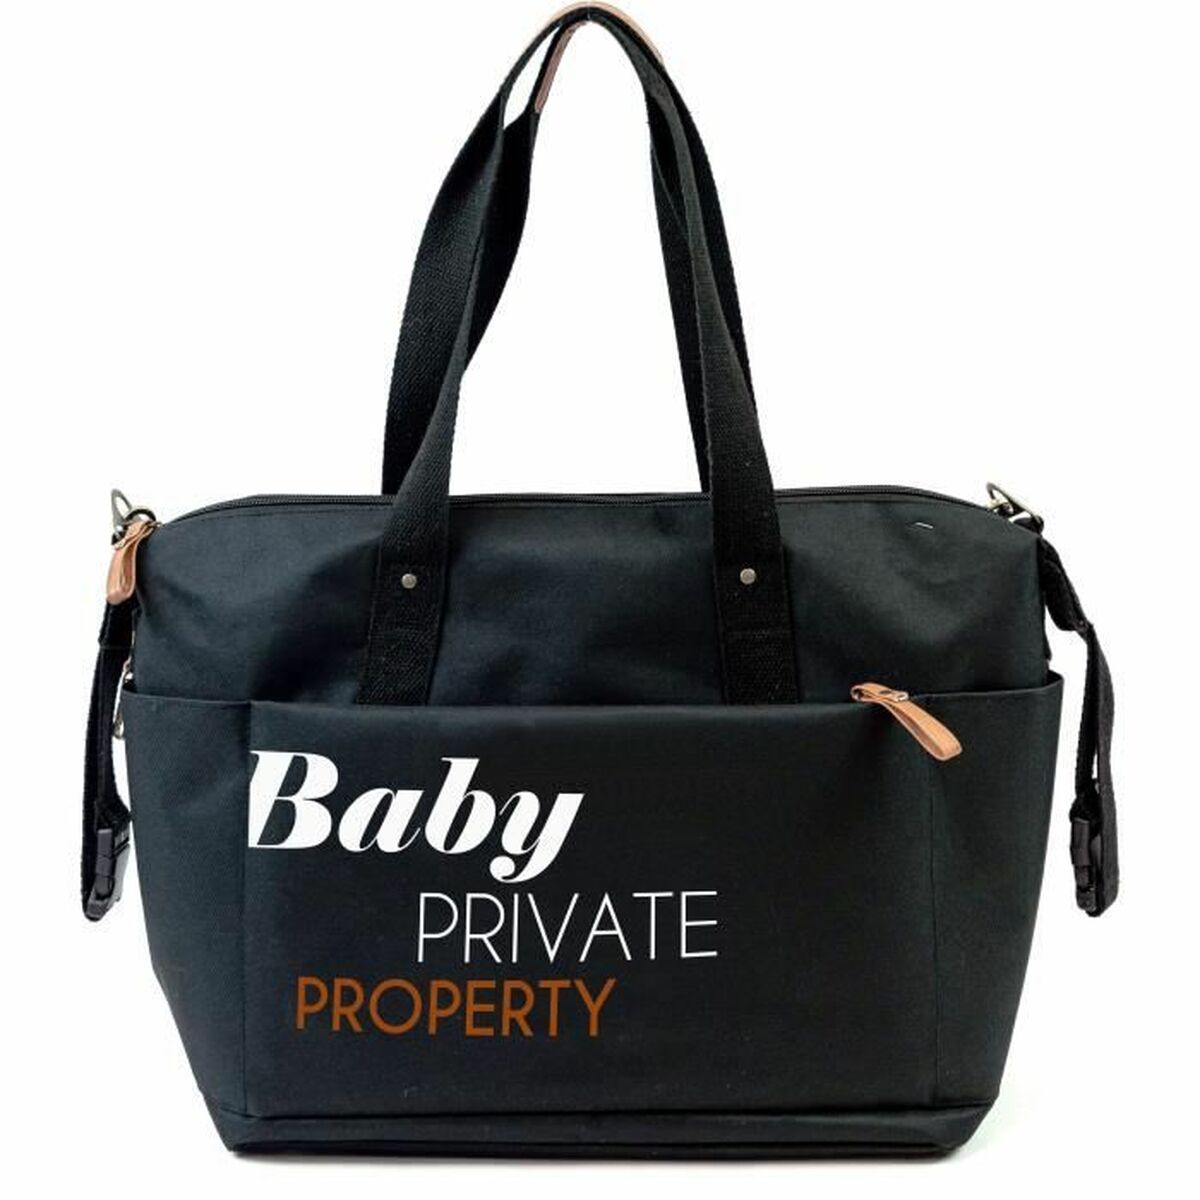 Diaper Changing Bag Baby on Board Simply duffle Black